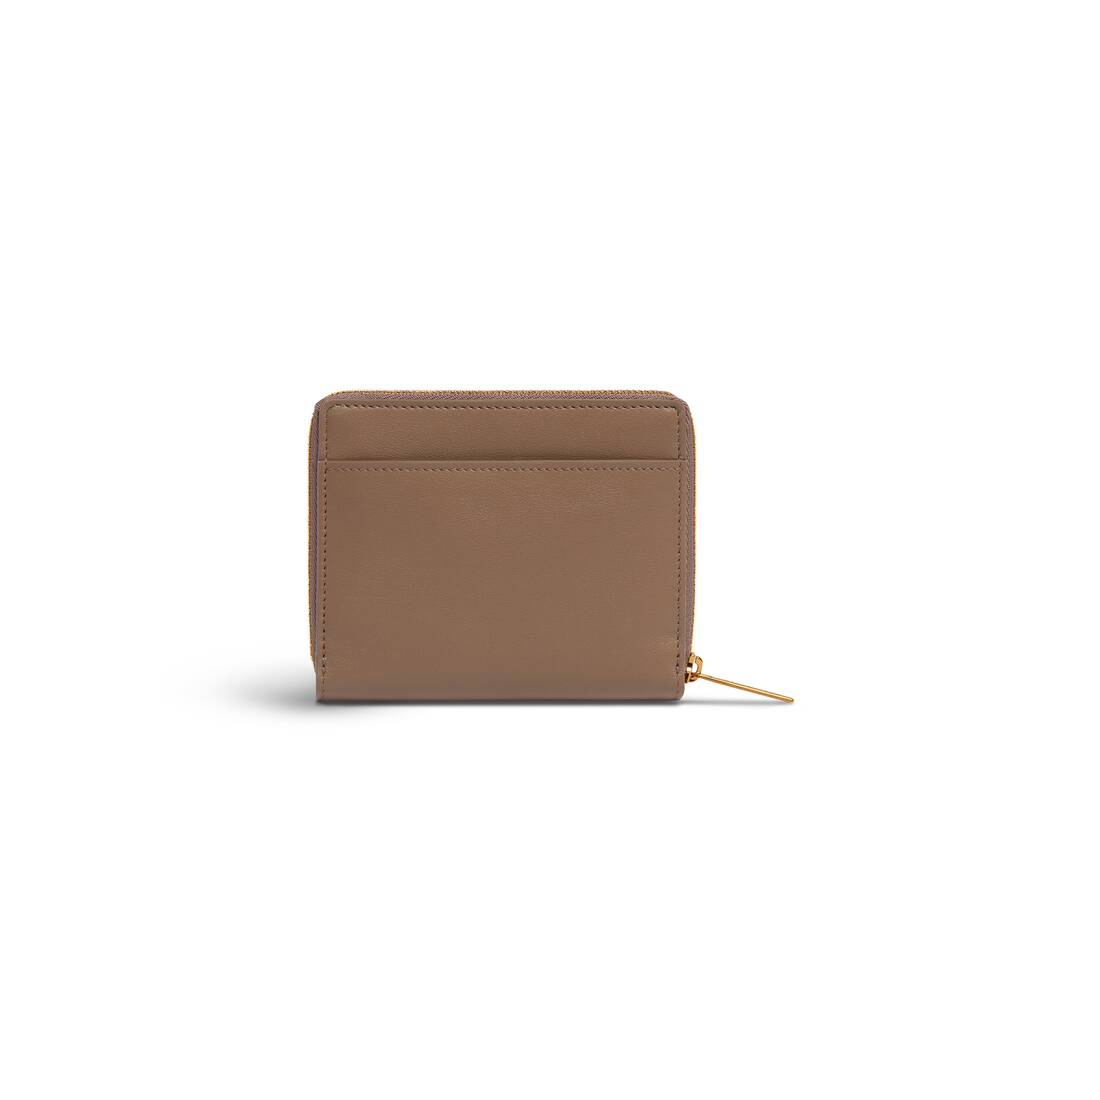 Women's Envelope Compact Wallet With Flap in Light Brown